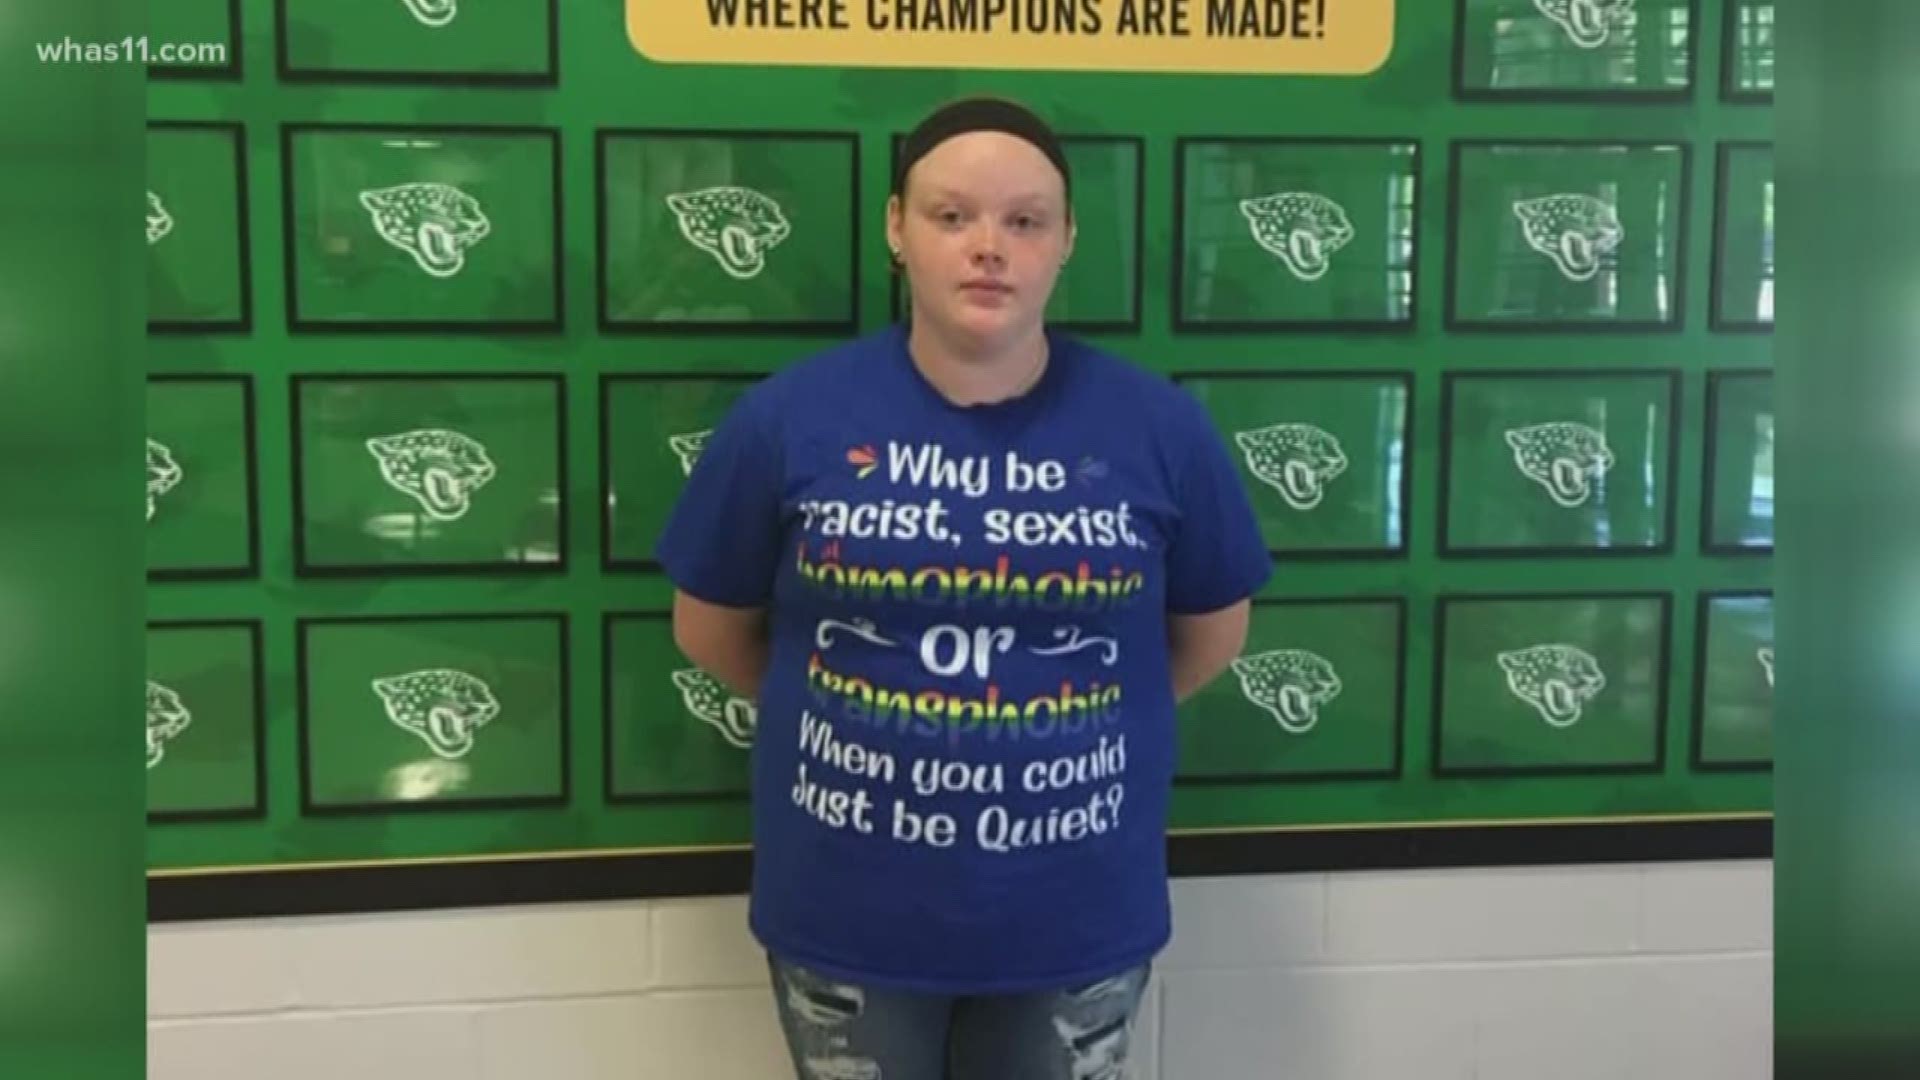 Parents are asking for an apology from a southern Indiana school after they say, their 13-year-old daughter was pulled from class for the T-shirt she was wearing.